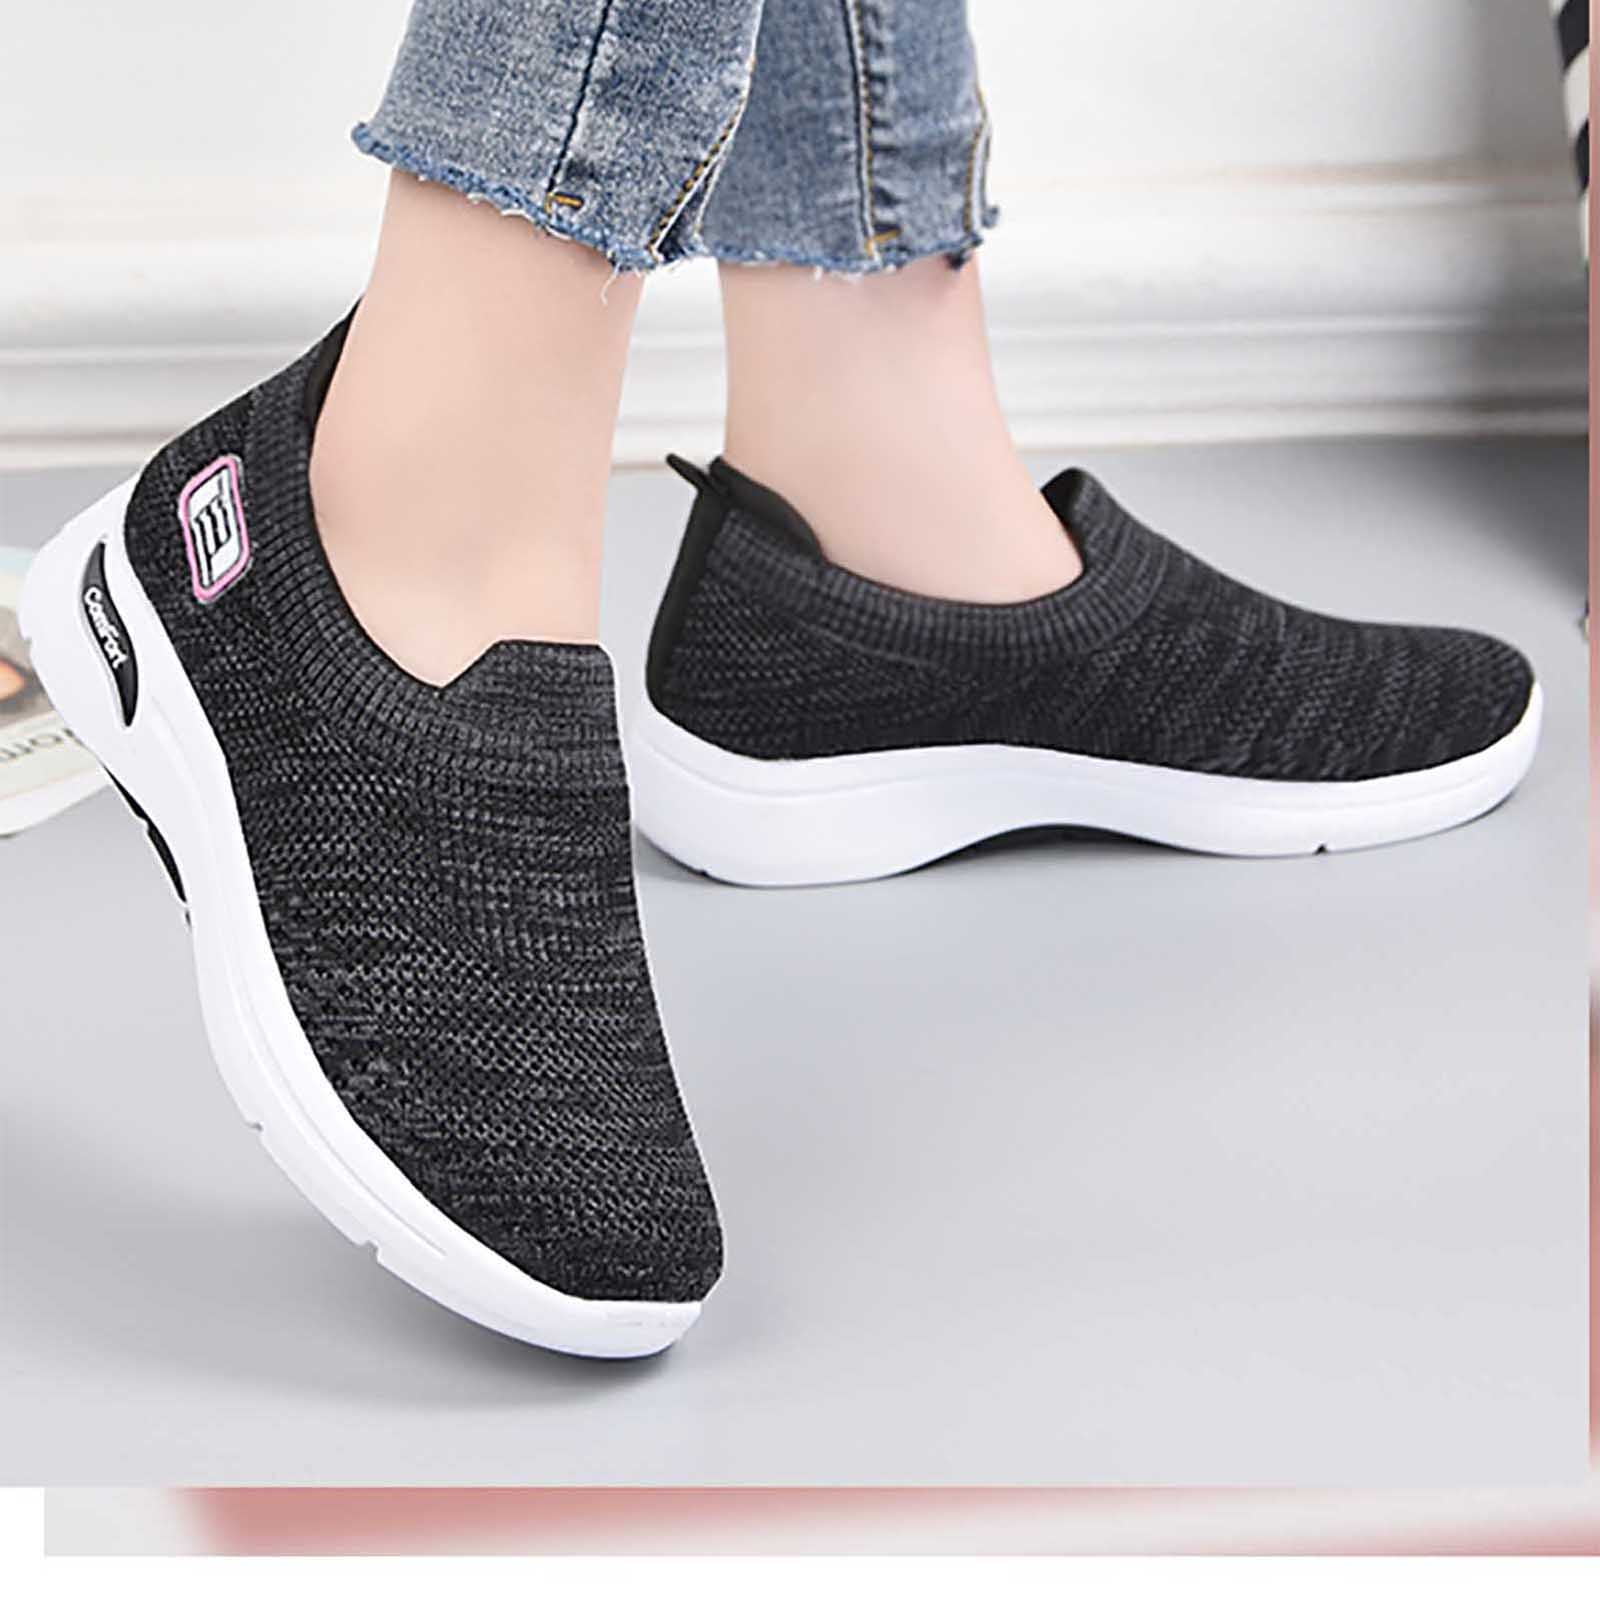 CAMPUS DOLPHIN Running Shoes For Women - Buy CAMPUS DOLPHIN Running Shoes  For Women Online at Best Price - Shop Online for Footwears in India |  Flipkart.com